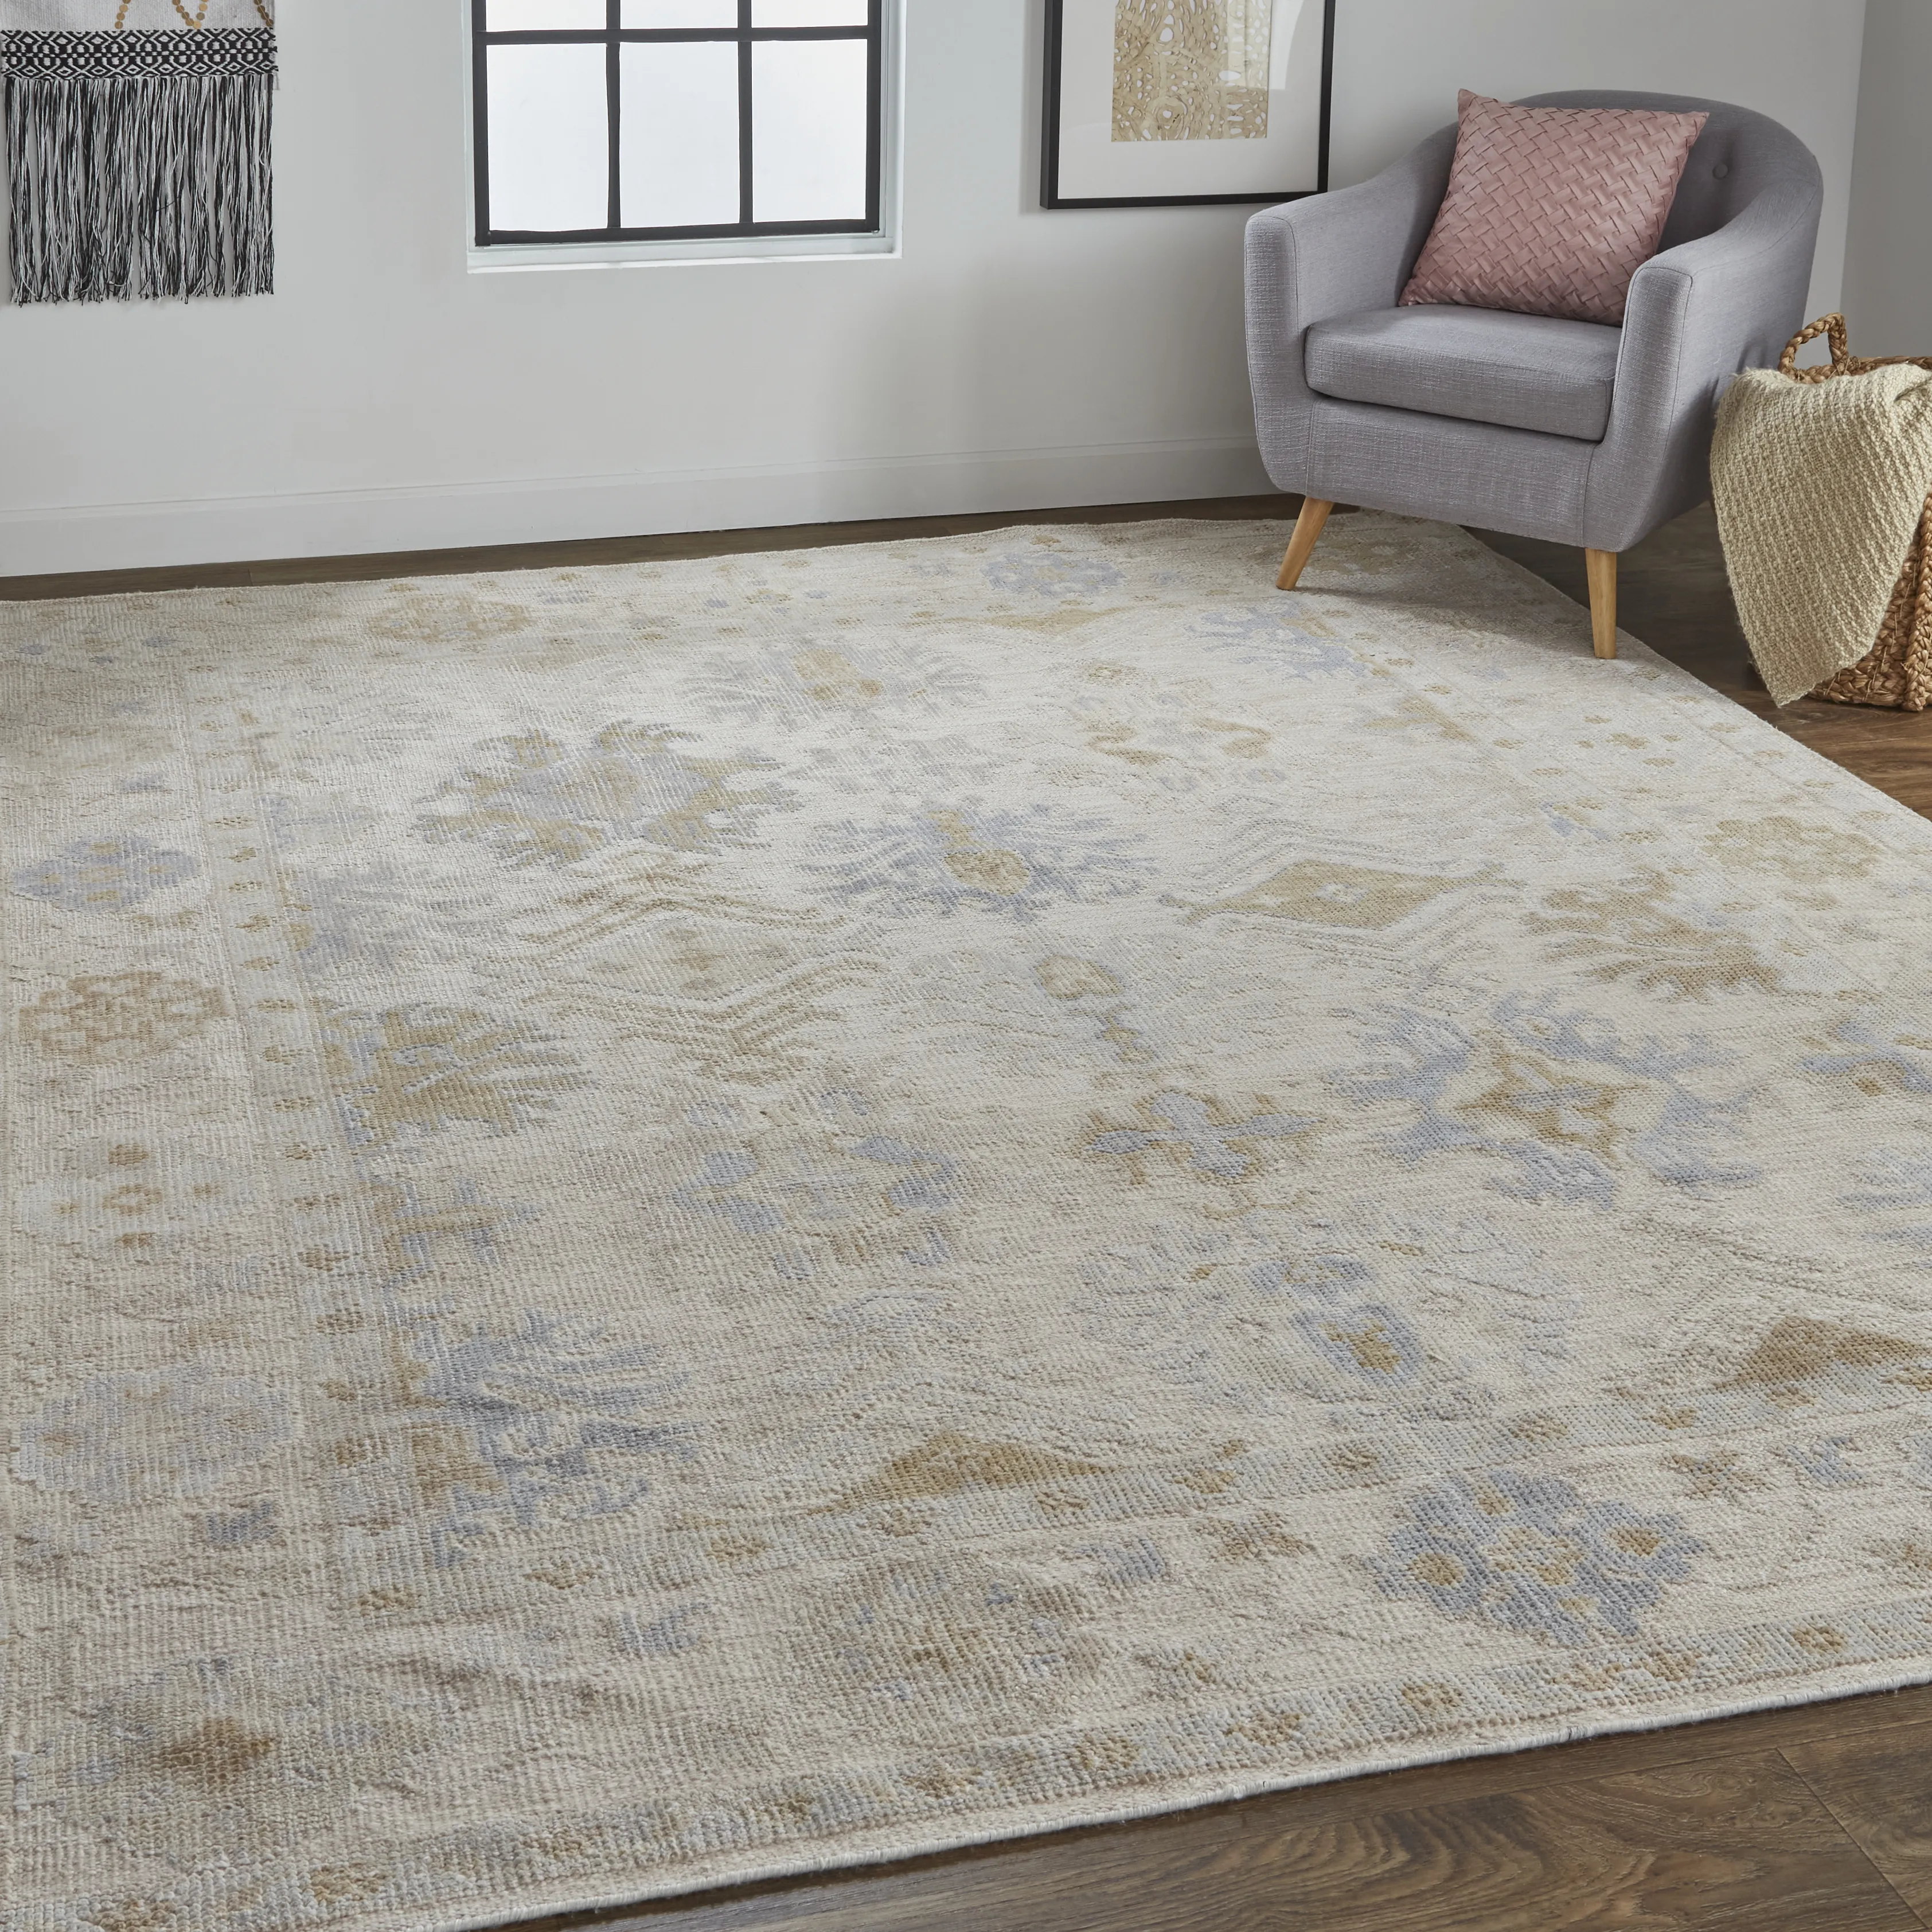 Wendover 6841F Ivory/Tan/Blue 8' x 10' Rug